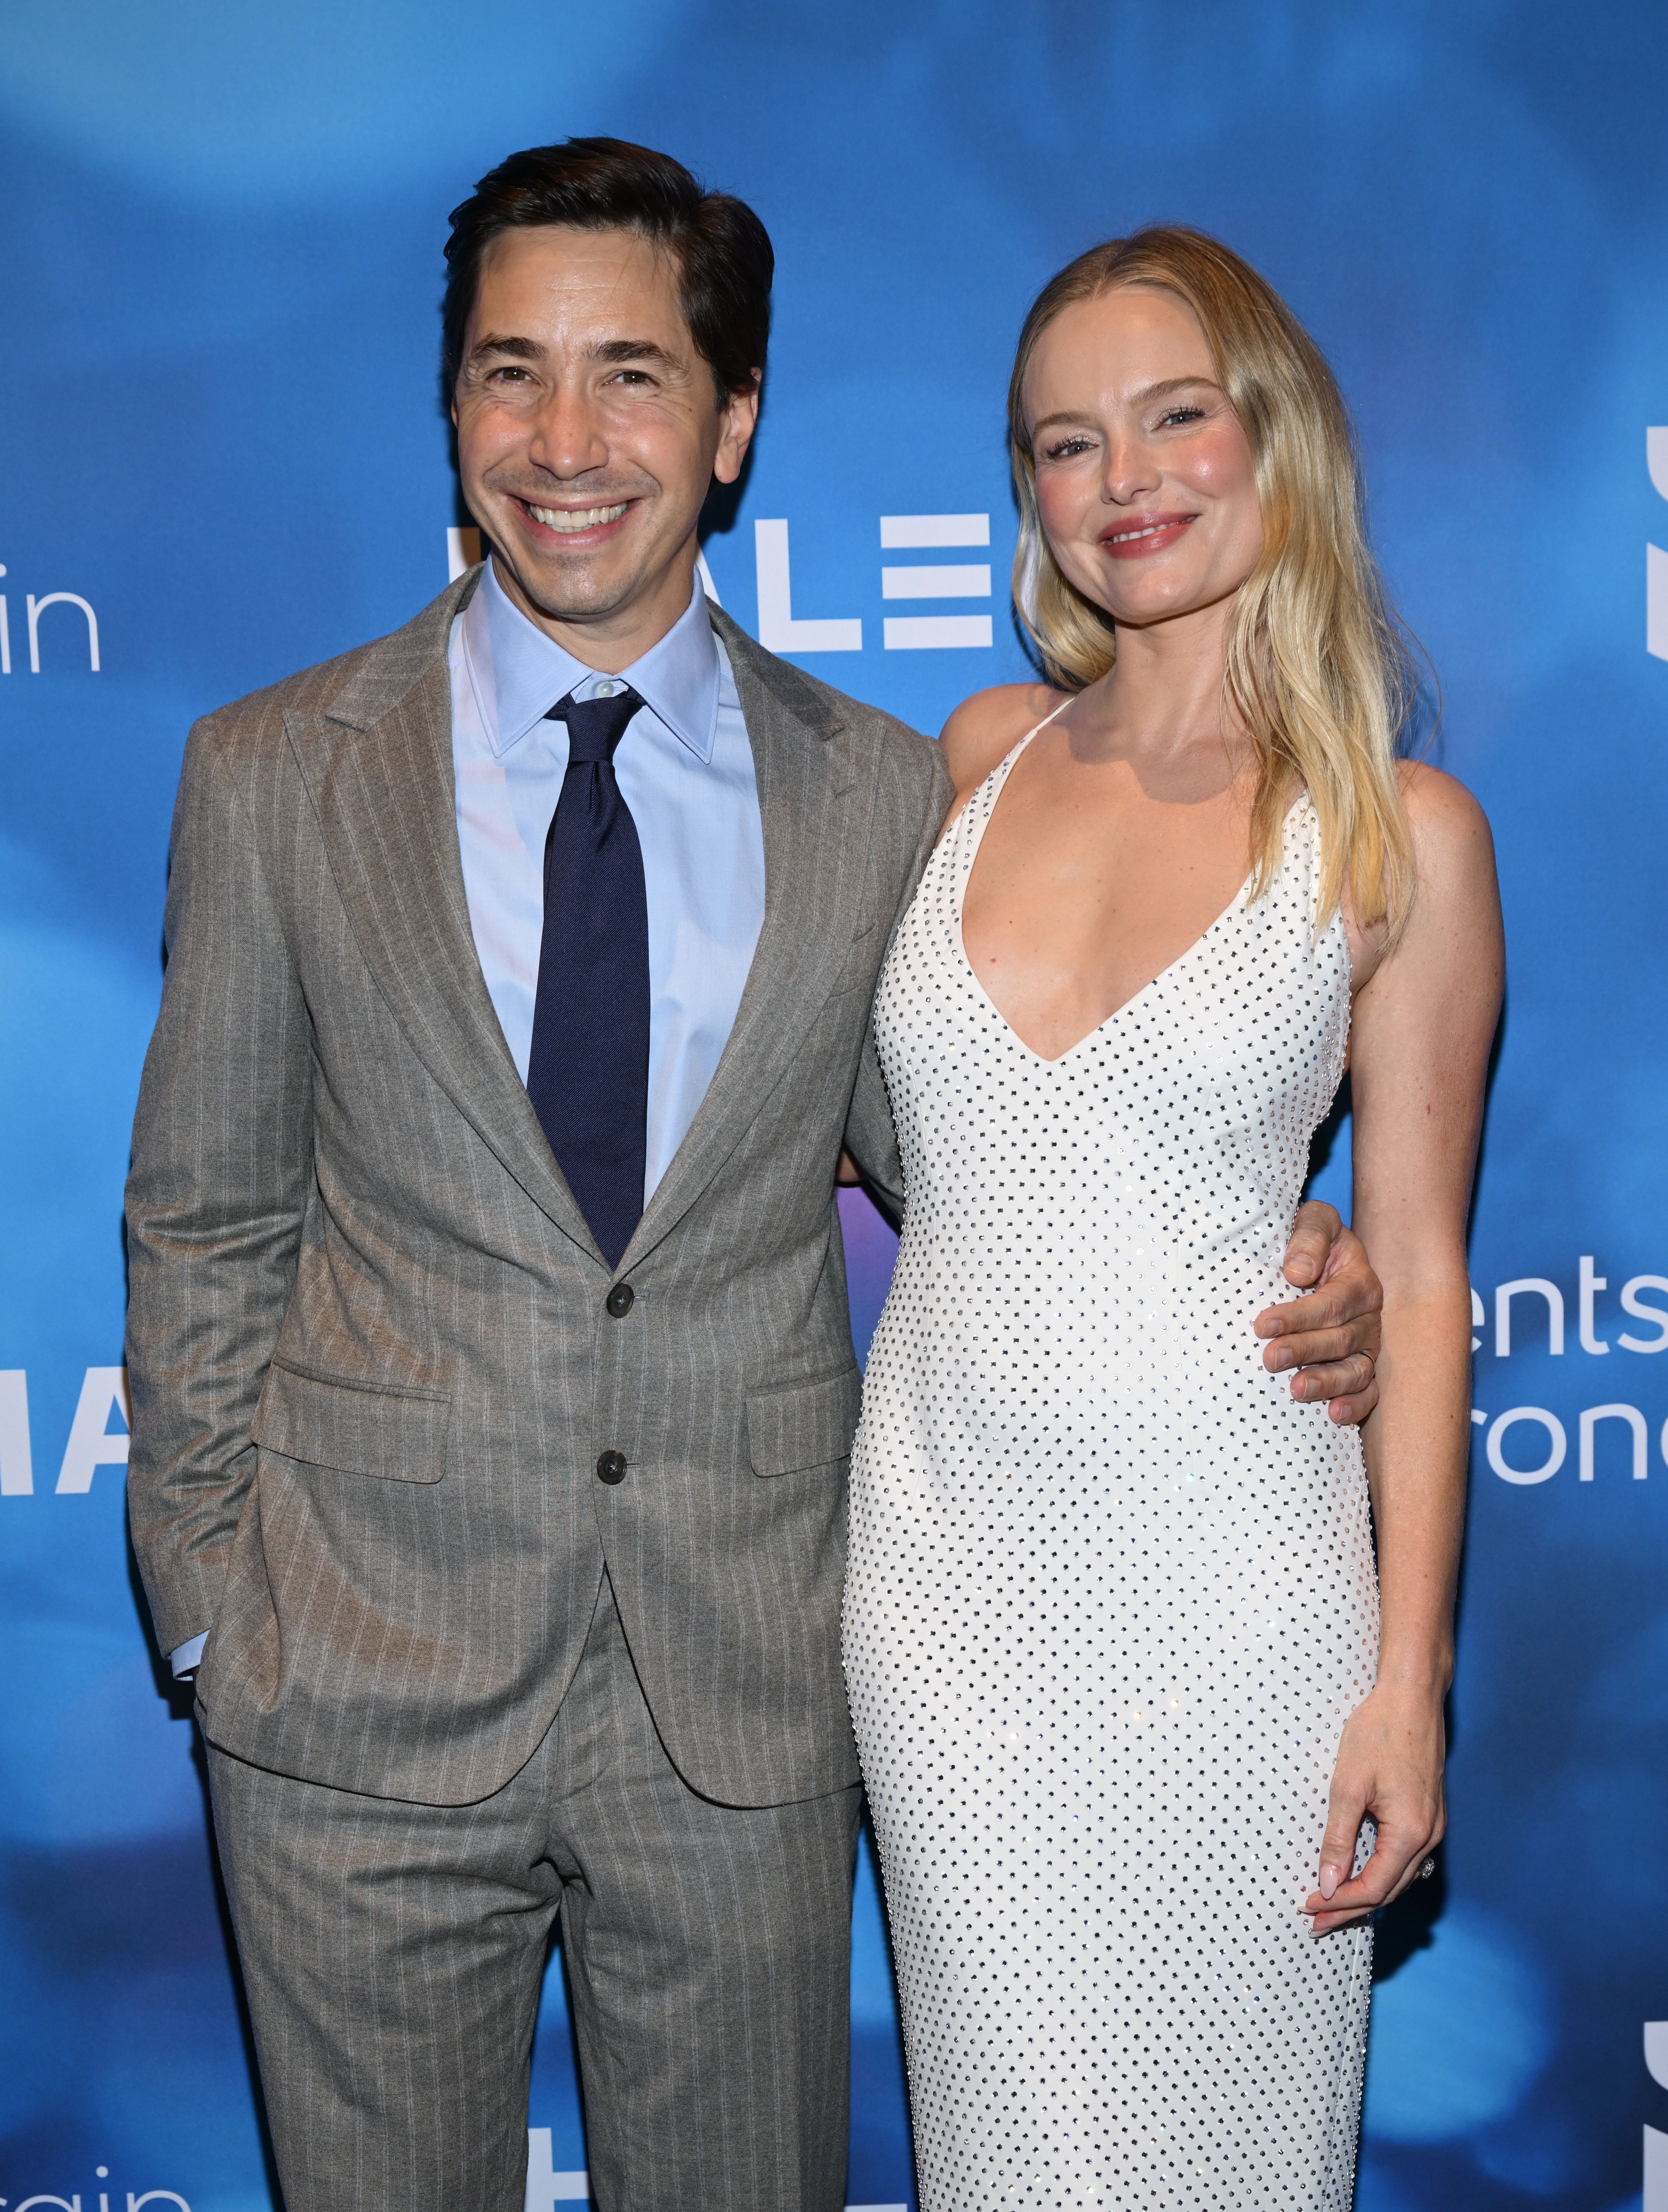 She posed with her husband Justin Long